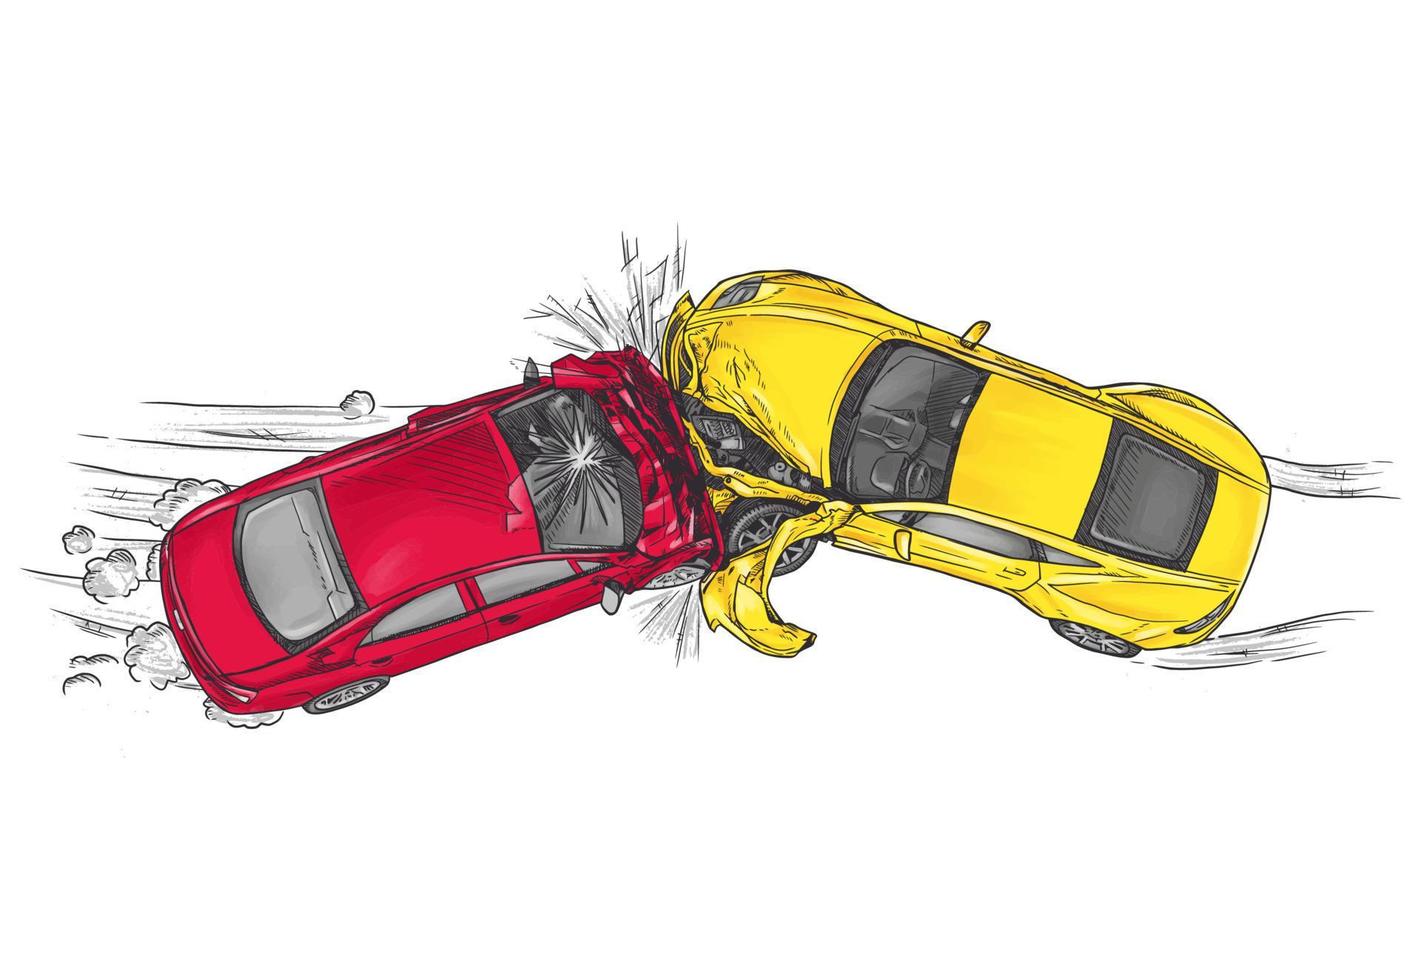 Two cars crash, crashing into each other's front hand drawn style vector illustration. Car crash banner.